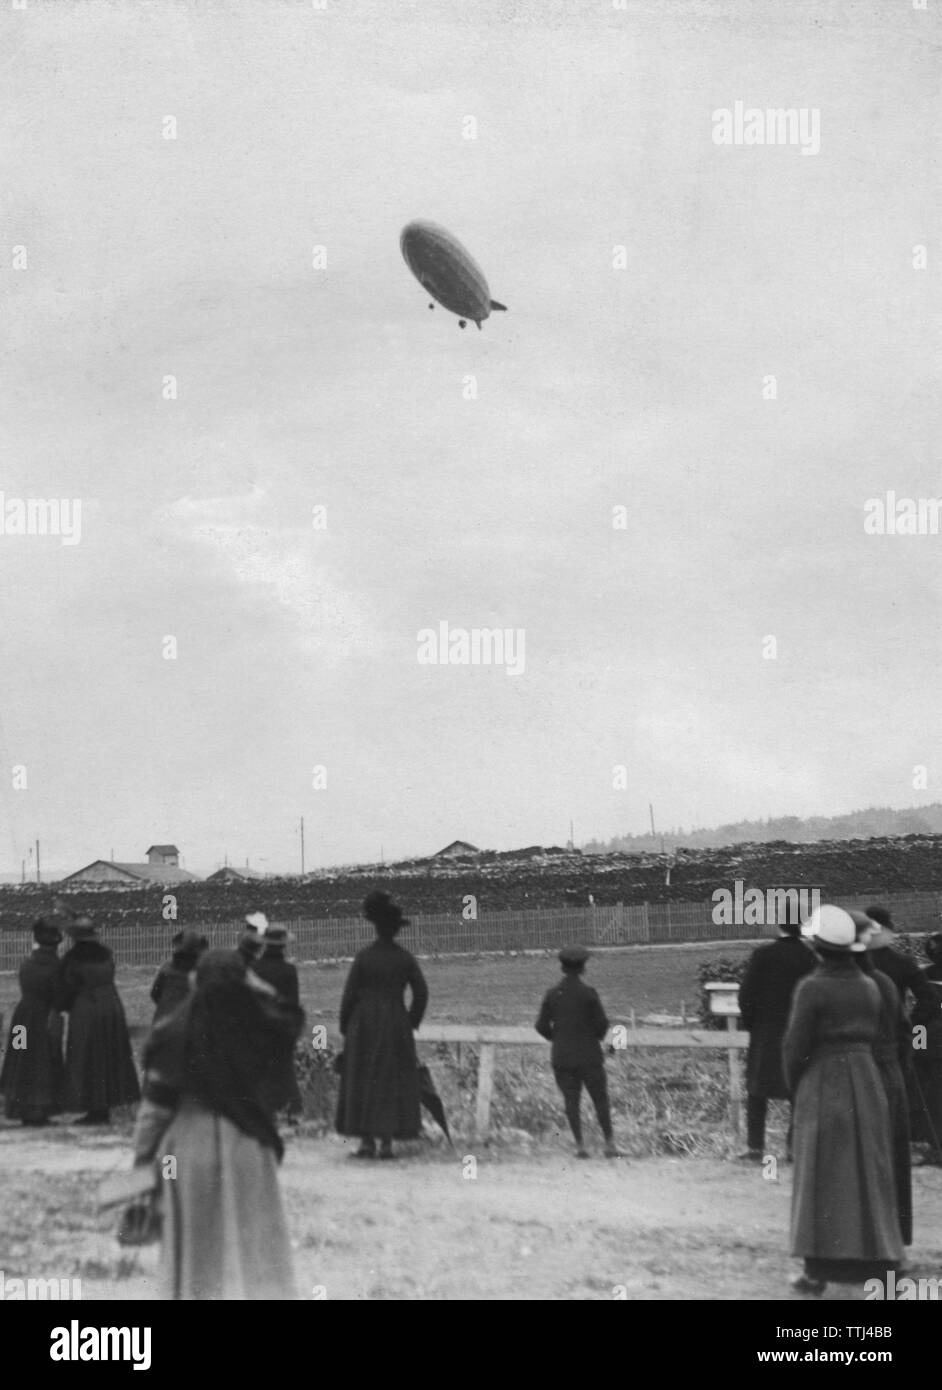 Zeppelin flight. LZ120 Bodensee was a passenger-carrying airship built by Zeppelin Luftschiffbau 1919. This picture is taken on October 8 1919 when the airship lands in Stockholm on route from Berlin, a trip that would take 17 hours. Stock Photo